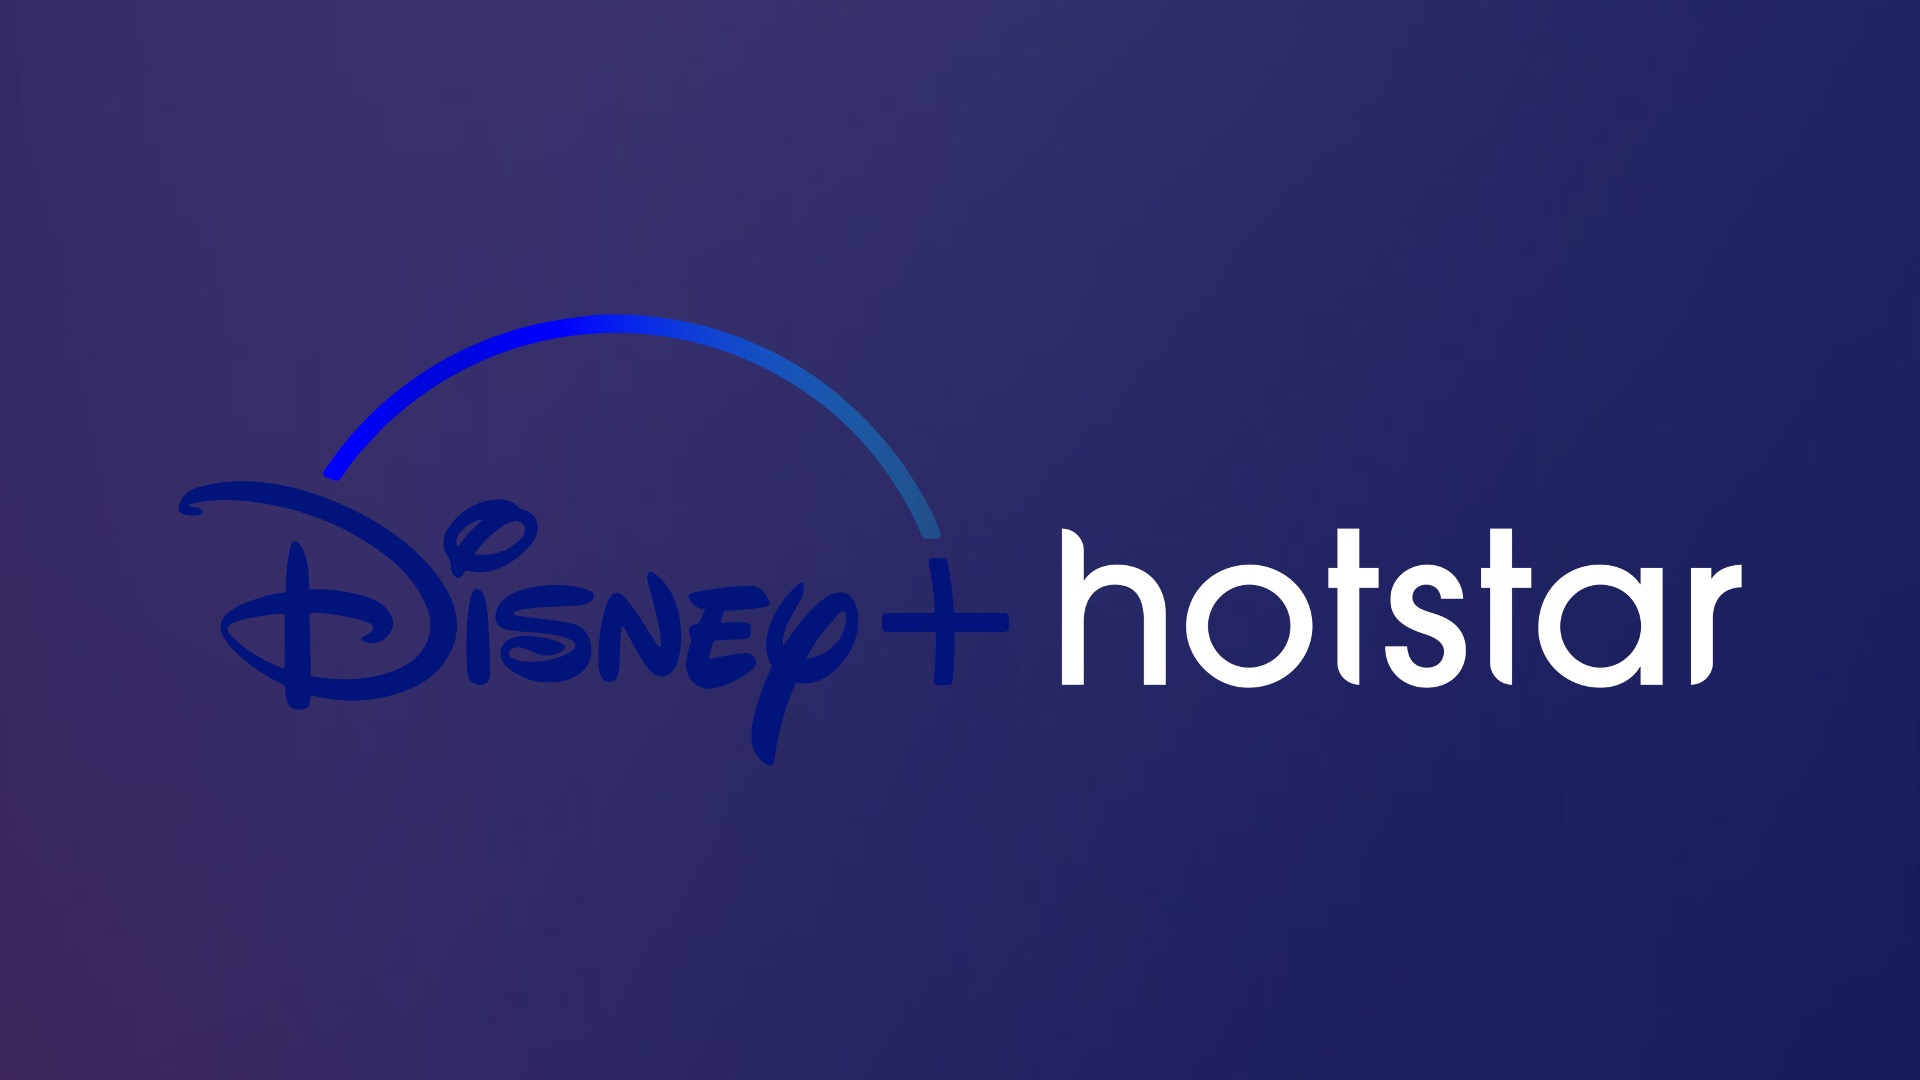 Disney+ Hotstar Indian launch put on hold